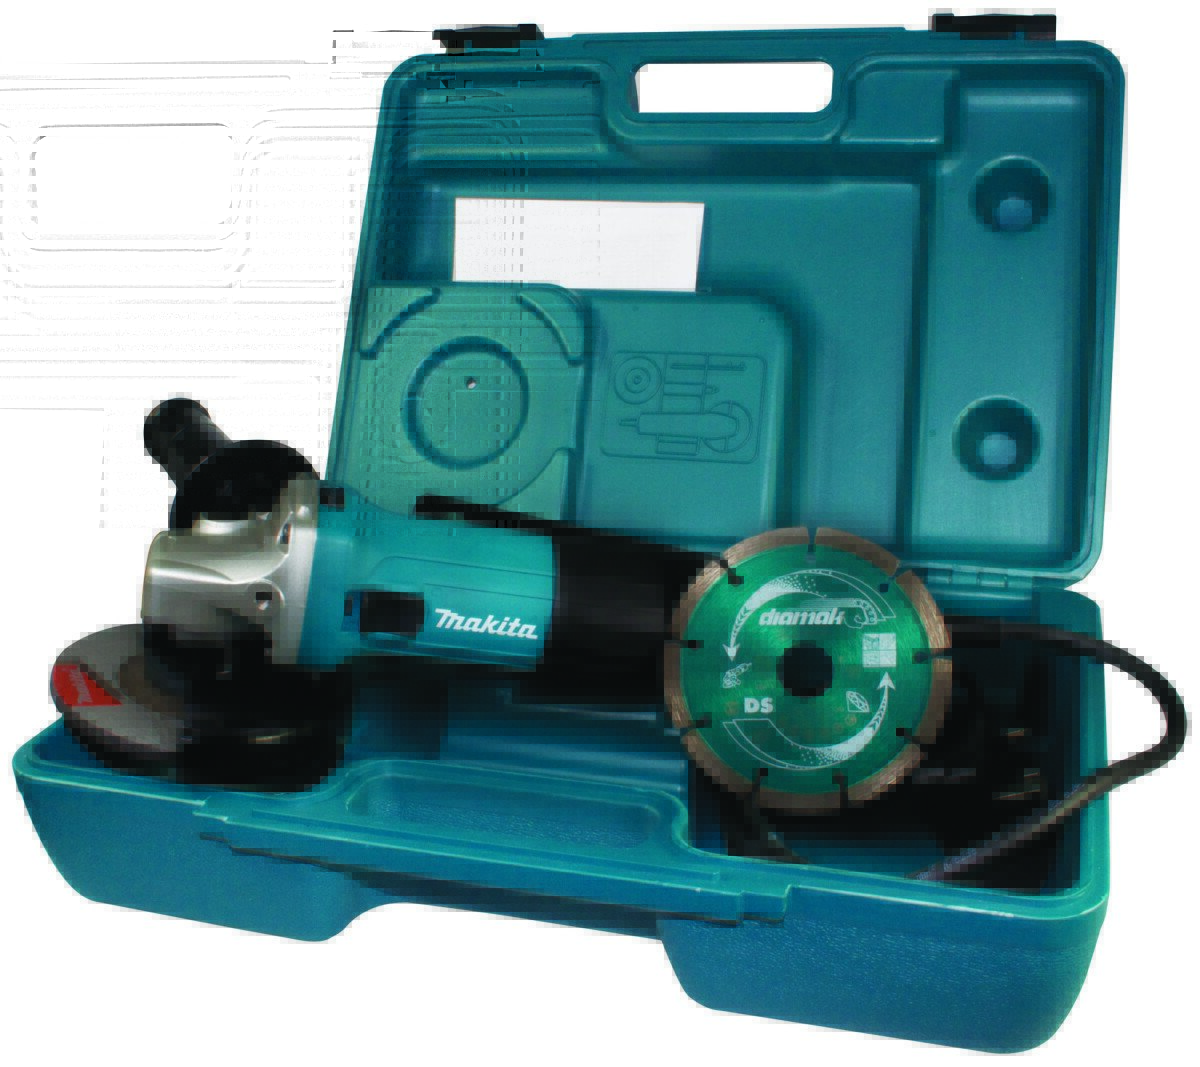 Makita GA4530RKD 4.1/2" 110V 720W (115mm) Angle Grinder with Diamond Blade in Case